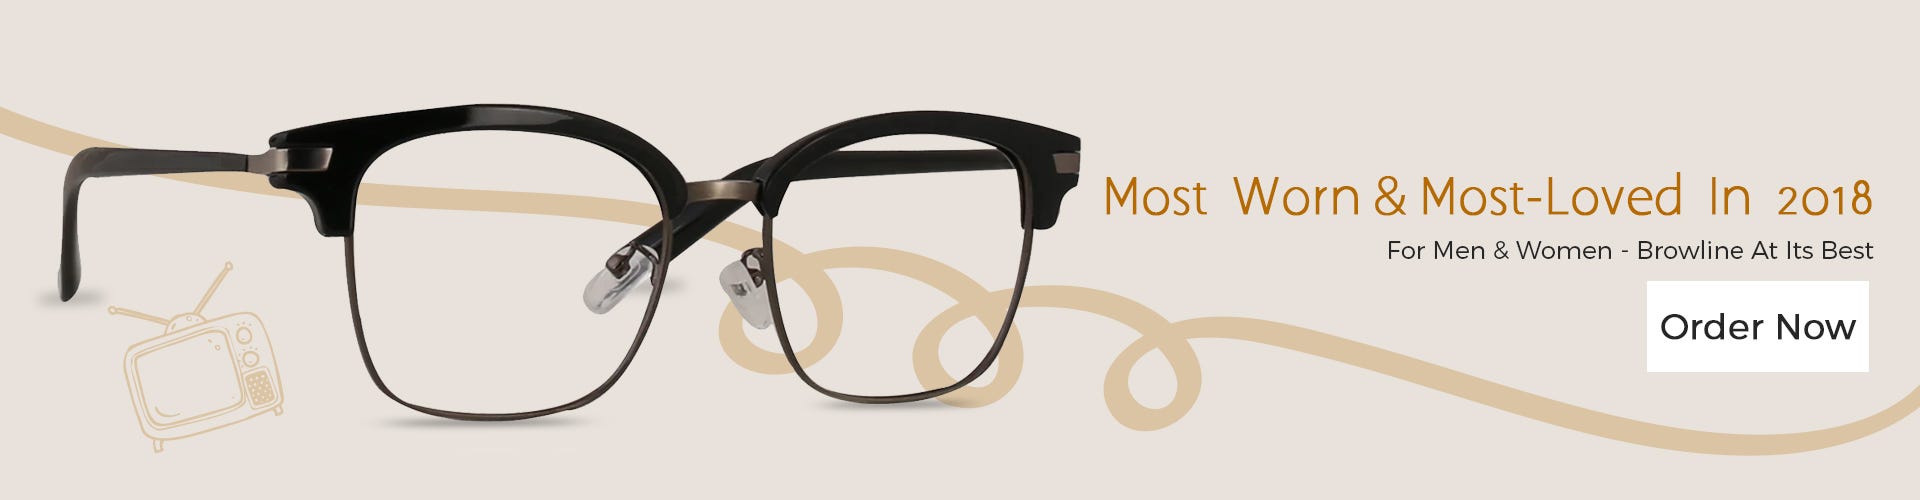 Stylistic Ending: Get The Best Frames of 2018 at Goggles4U 